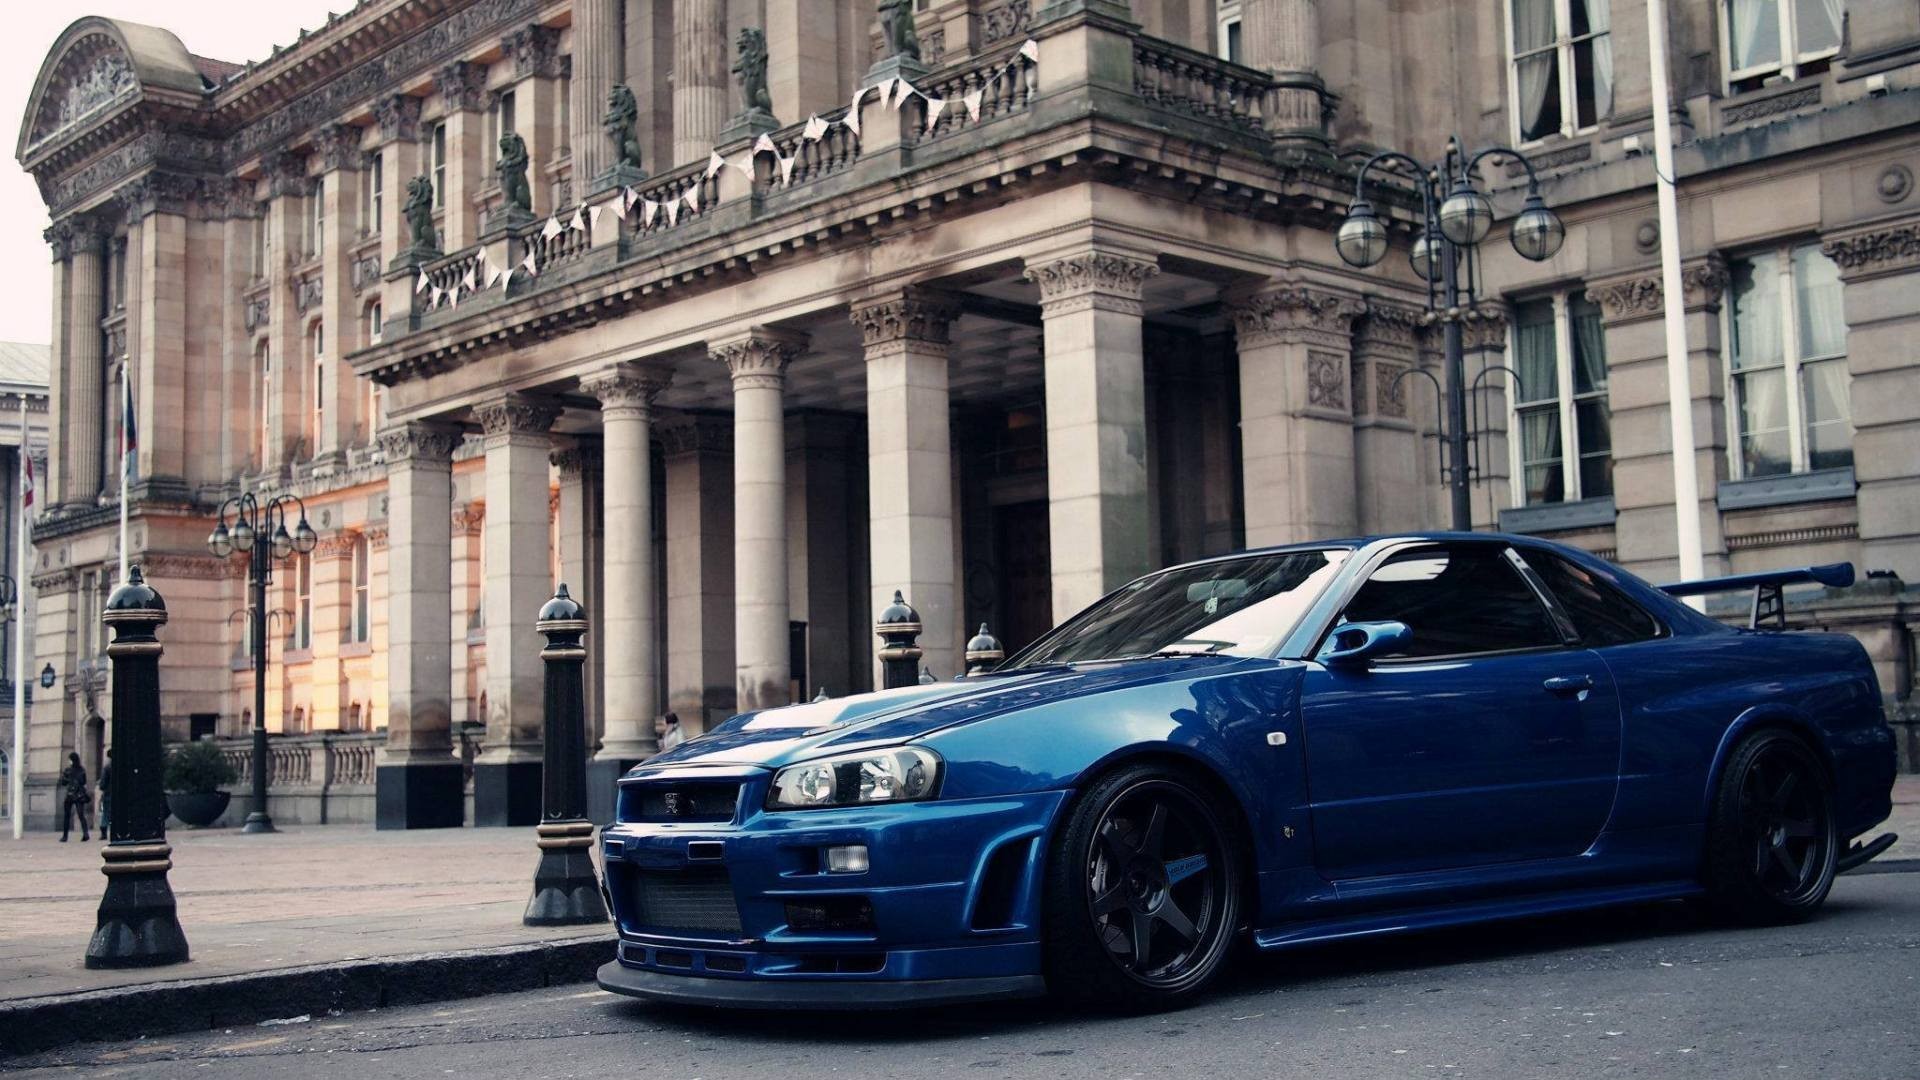 1920x1080 Nissan Skyline Gtr Wallpaper Full HD White Widescreen Iphone Blue Nismo :  Archived at Car Wallpaper – Slhando.com Nissan Skyline GTR Wallpapers | A…  ...